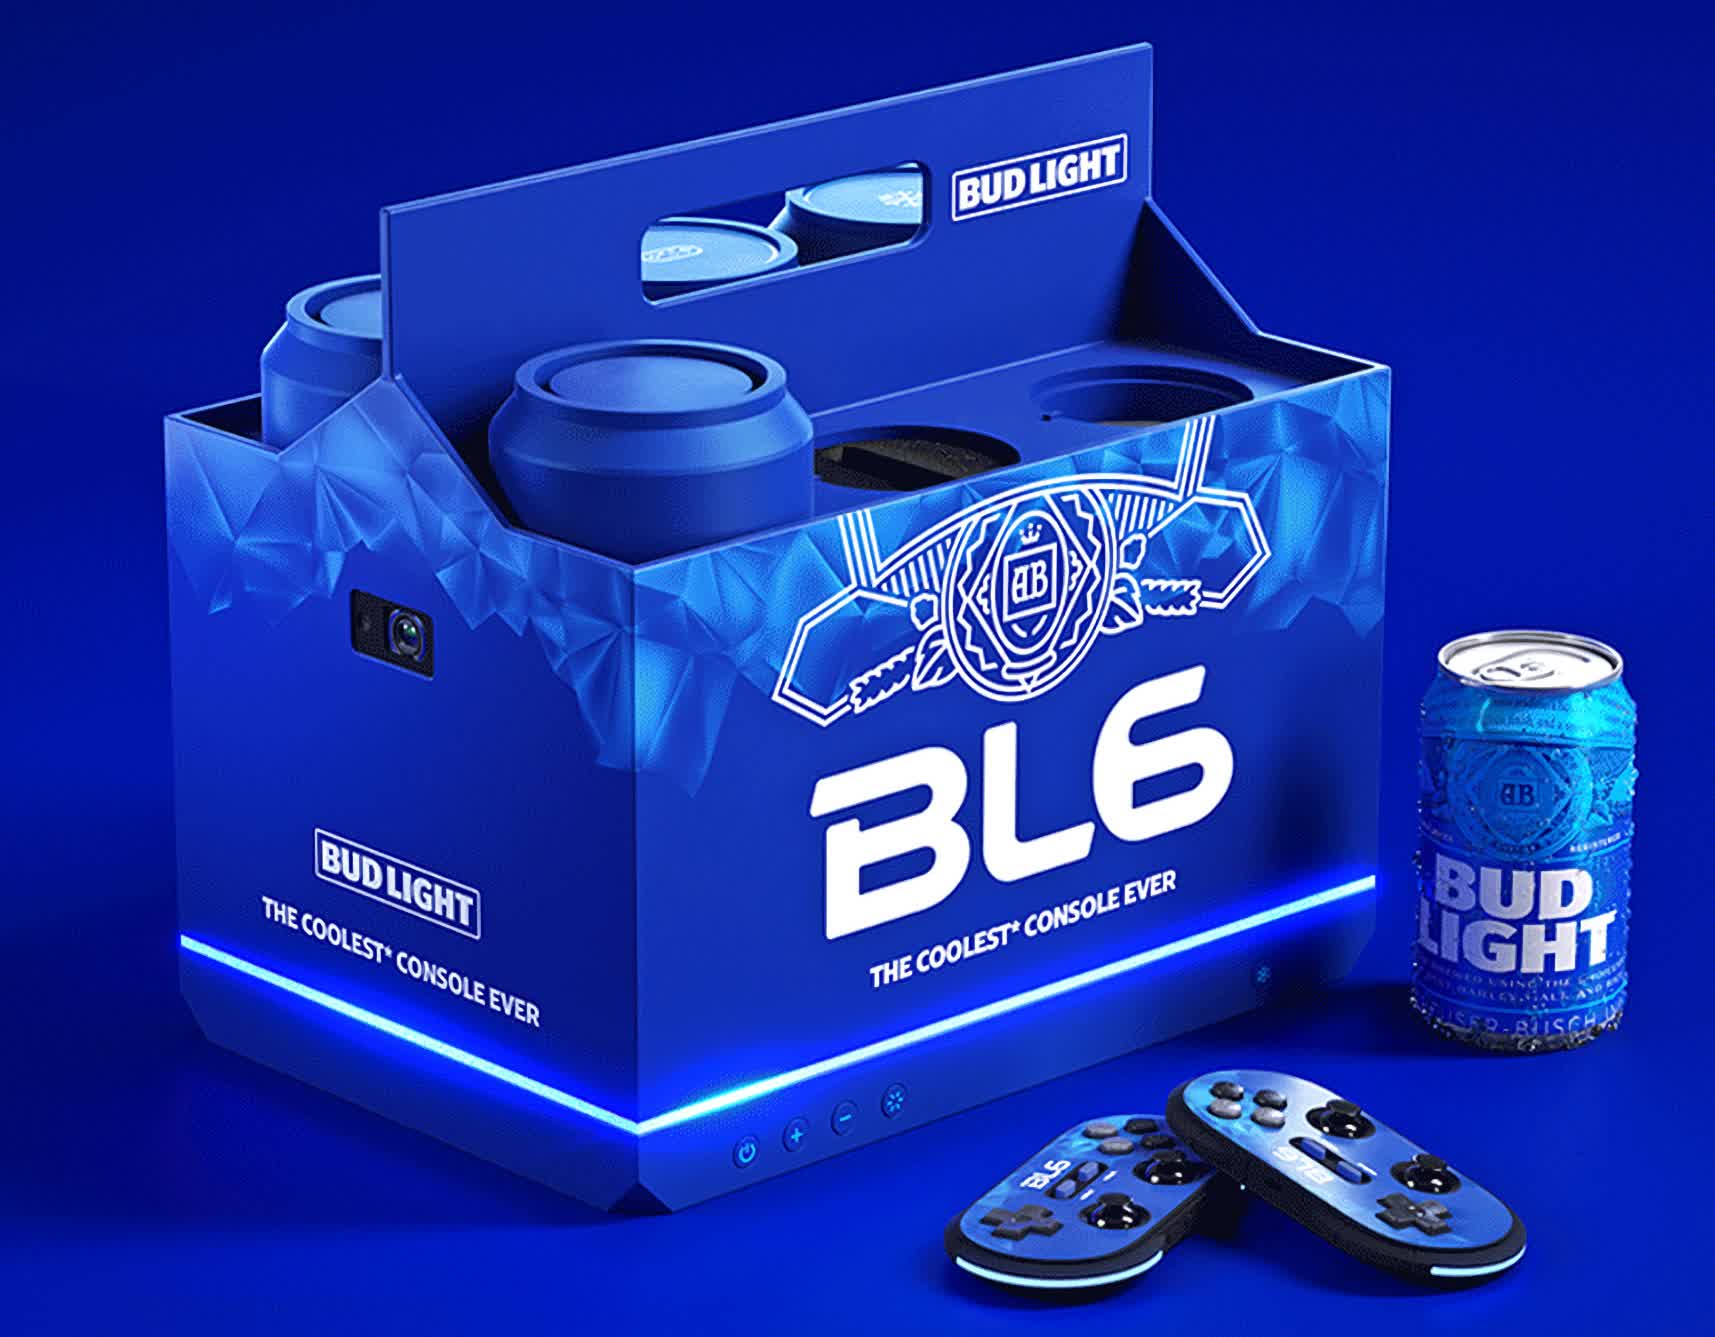 Bud Light's BL6 is a mini PC shaped like a six-pack that actually plays games